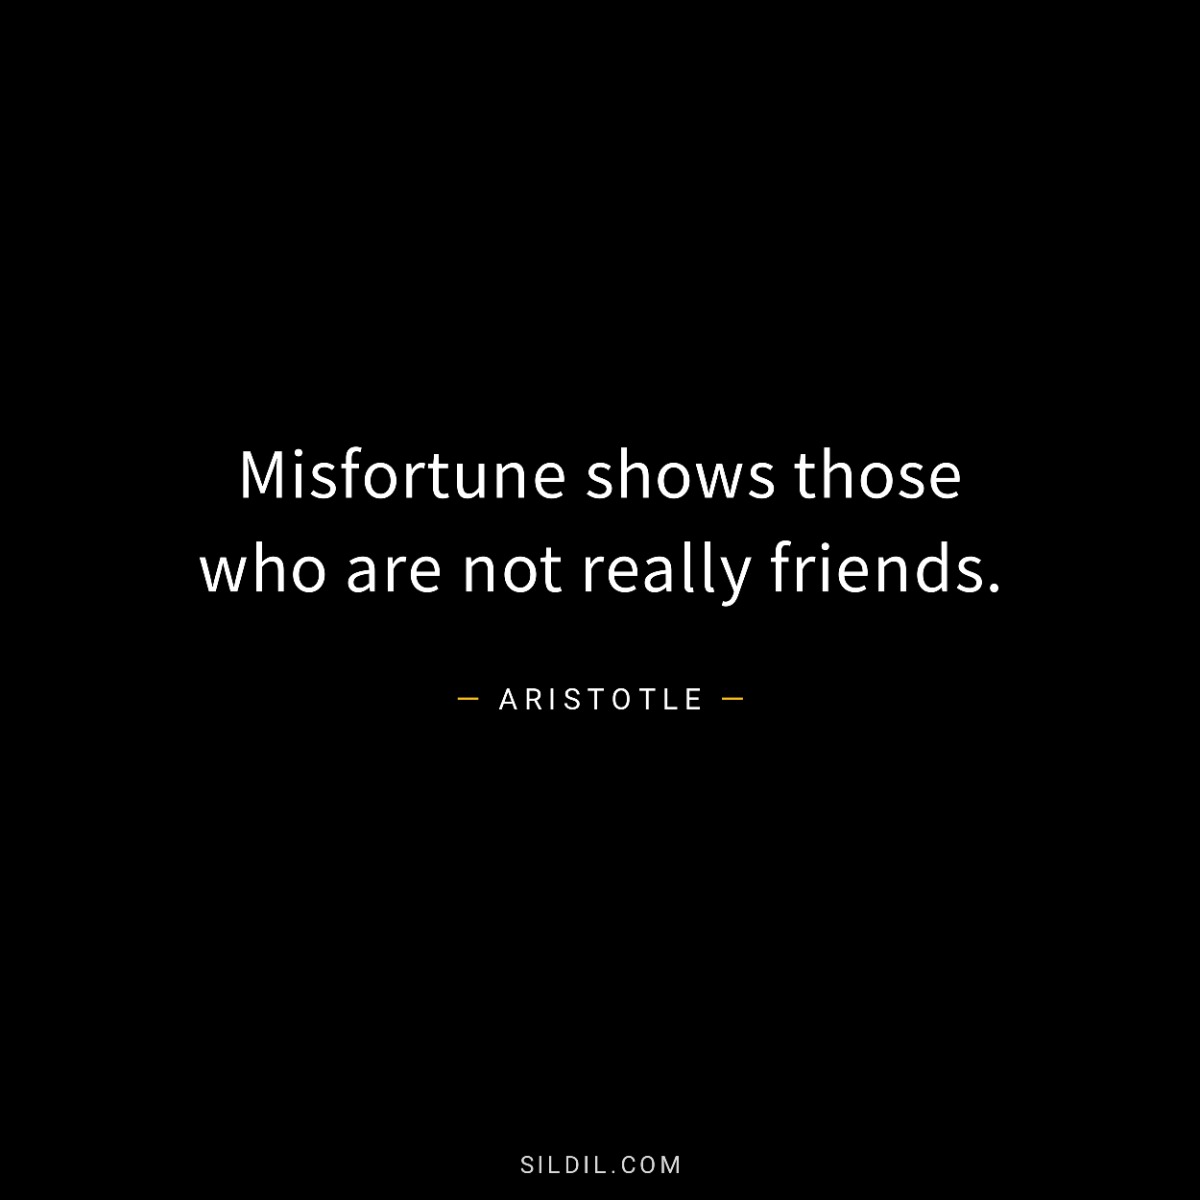 Misfortune shows those who are not really friends.